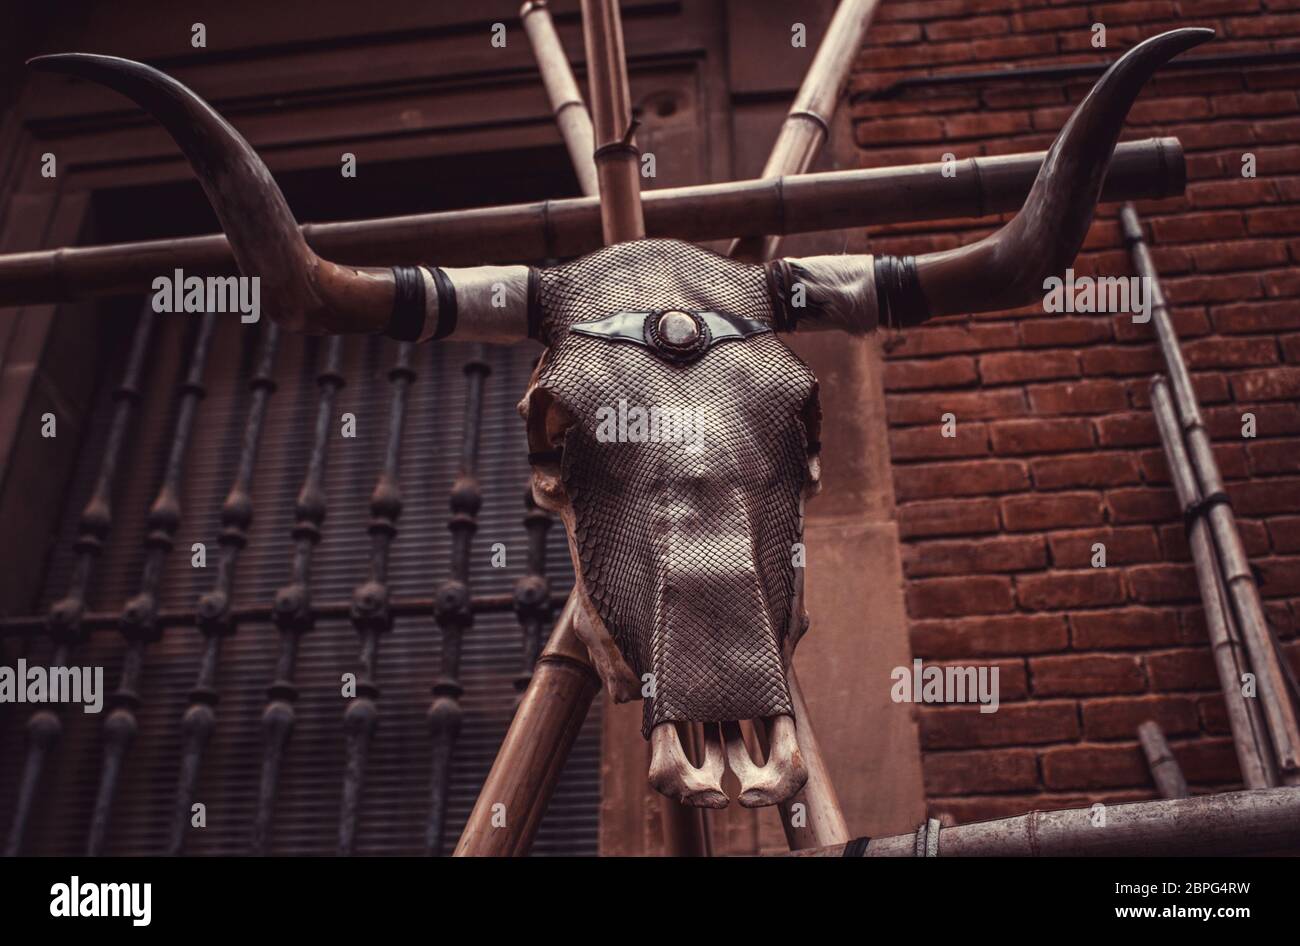 Goat skull in tent of campaign India, animals and symbols Stock Photo